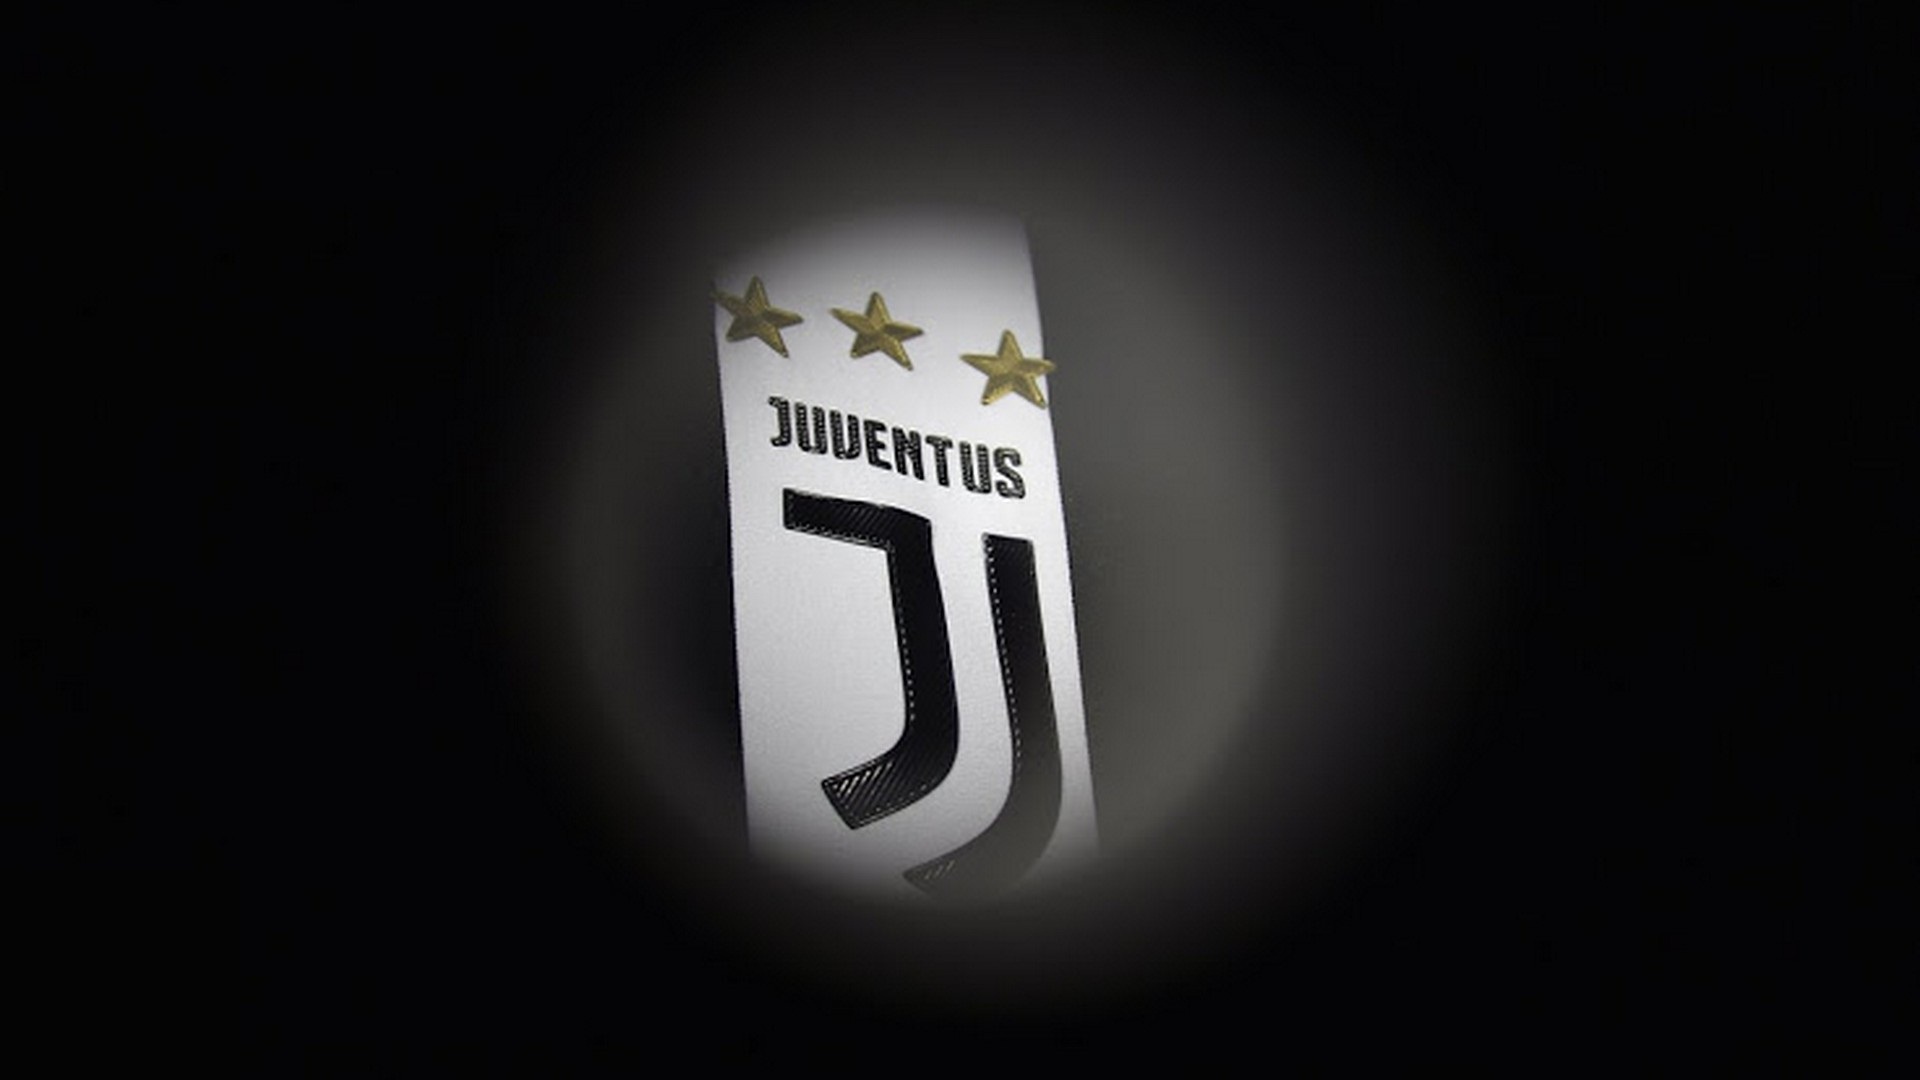 Wallpapers HD Juventus Logo With Resolution 1920X1080 pixel. You can make this wallpaper for your Mac or Windows Desktop Background, iPhone, Android or Tablet and another Smartphone device for free